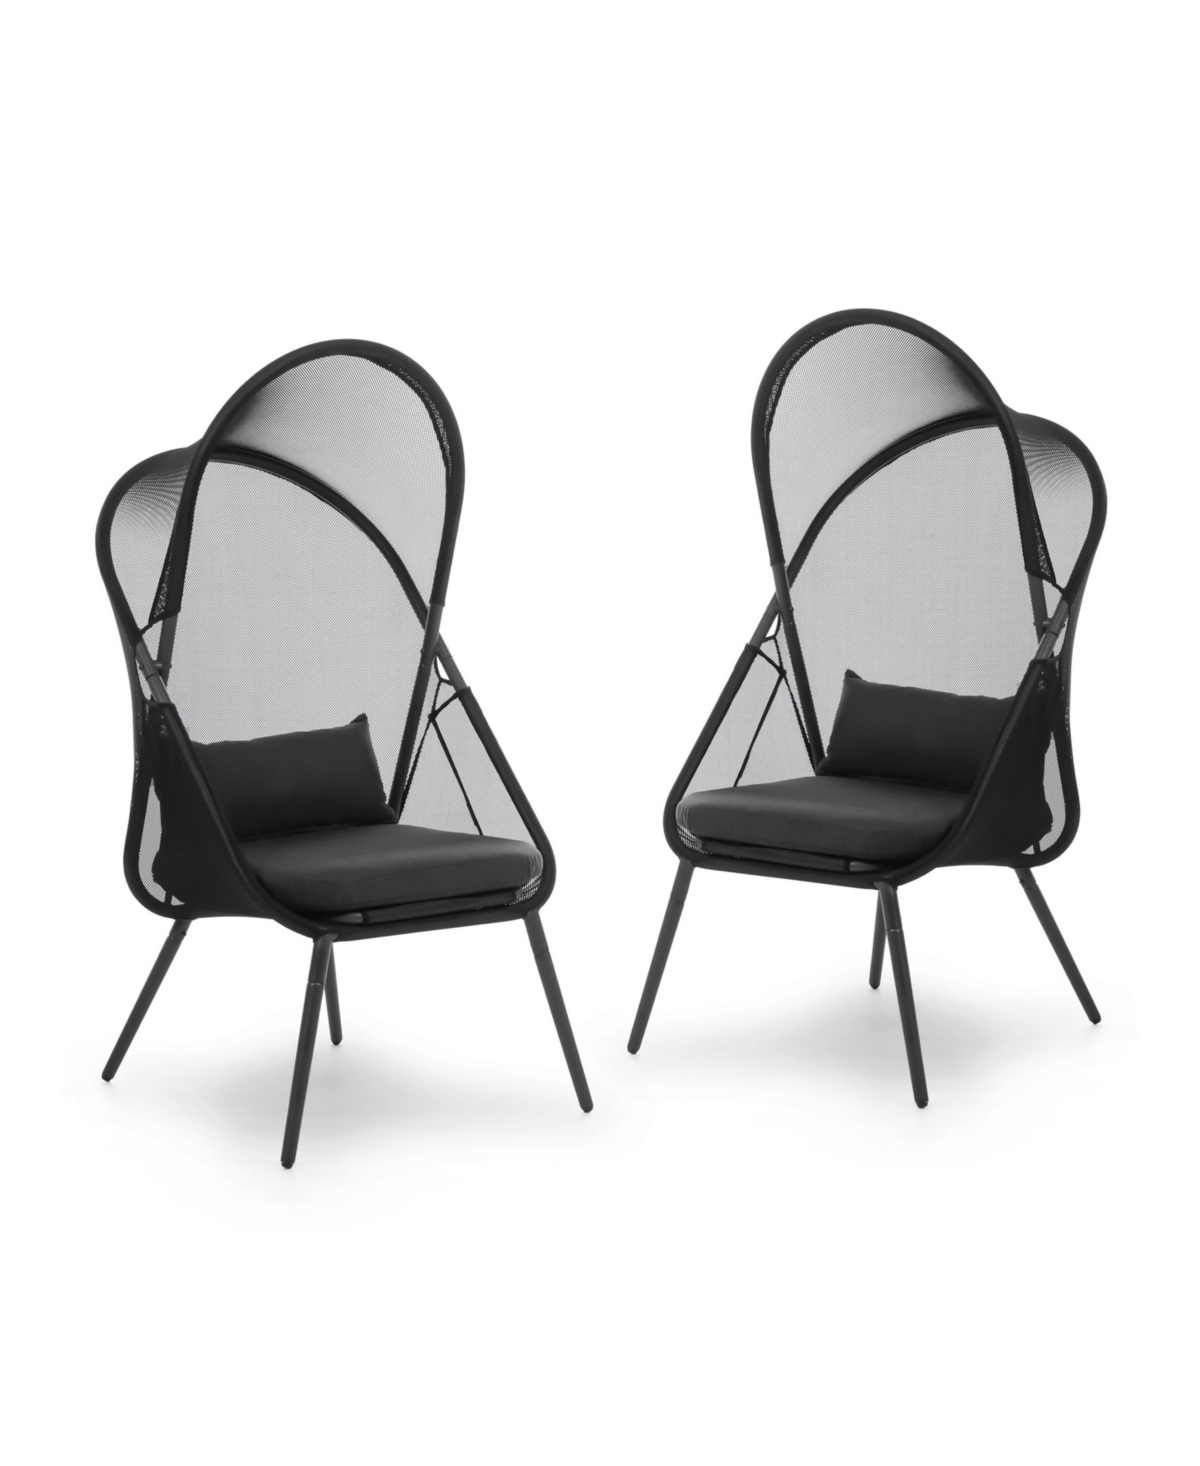 Furniture Of America 2 Piece Foldable Chairs With Mesh Canopy Cushions In Black